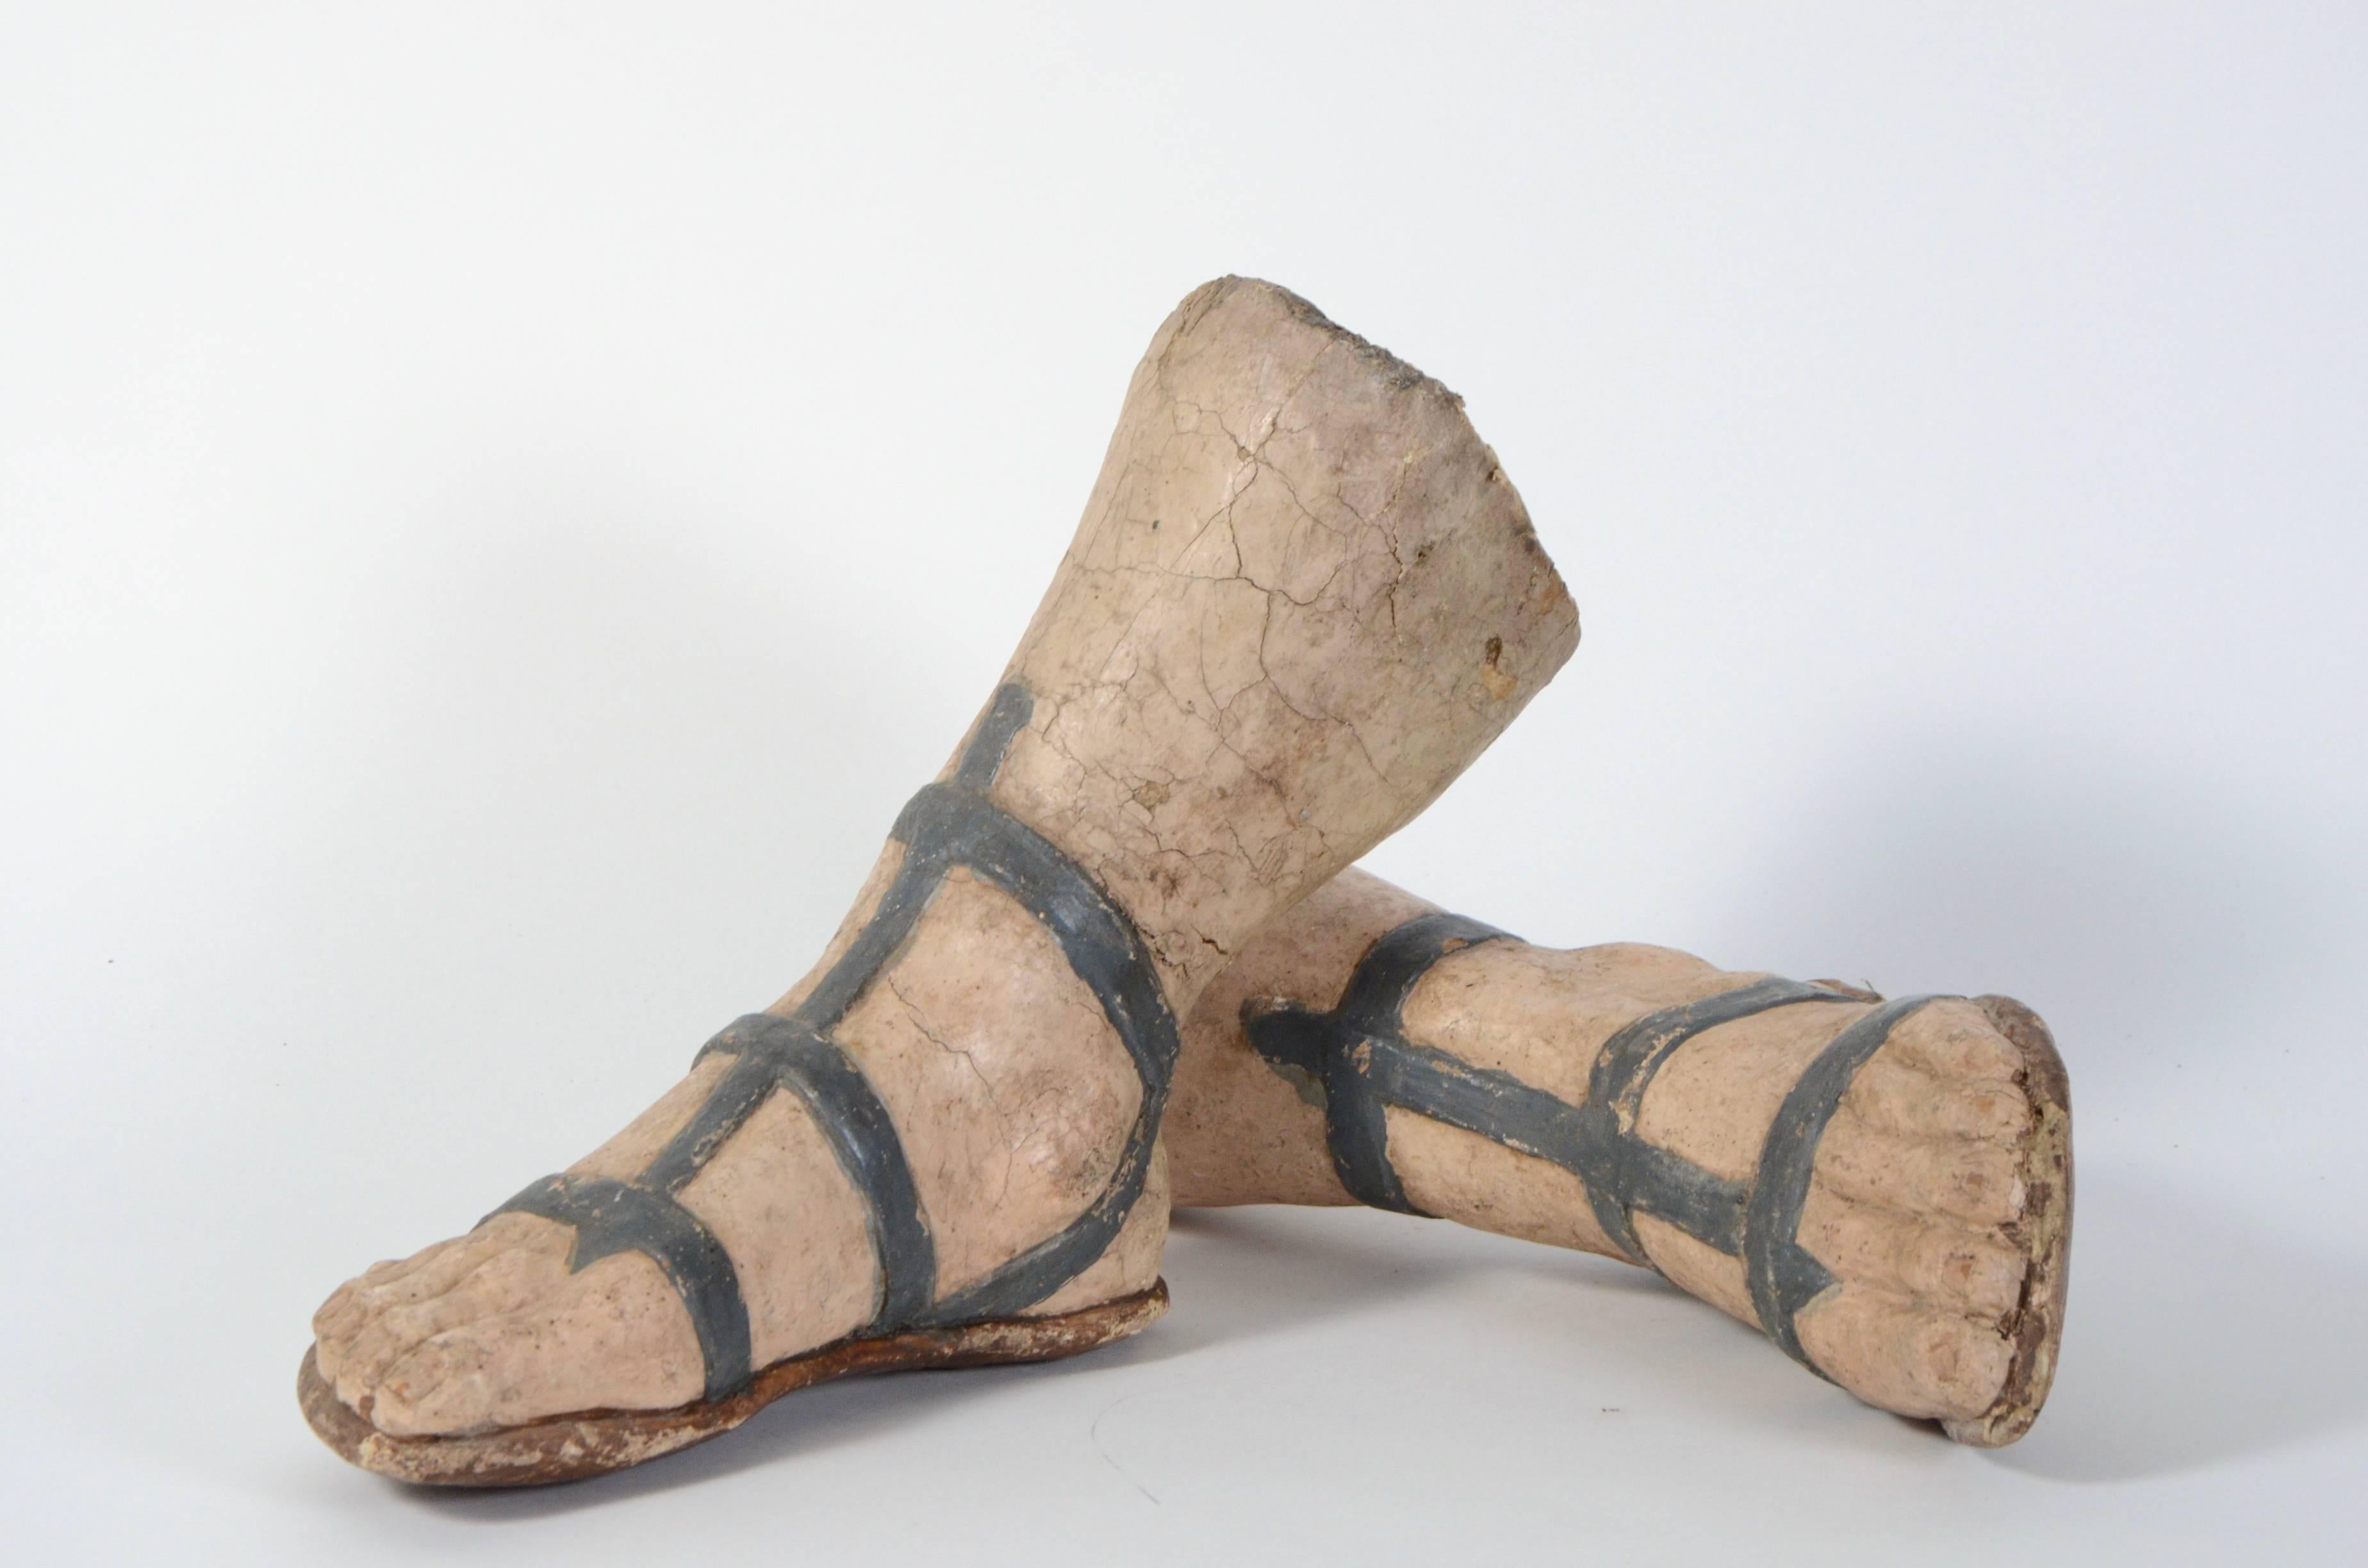 Pair of 18th century Venetian paper mache feet with sandals.